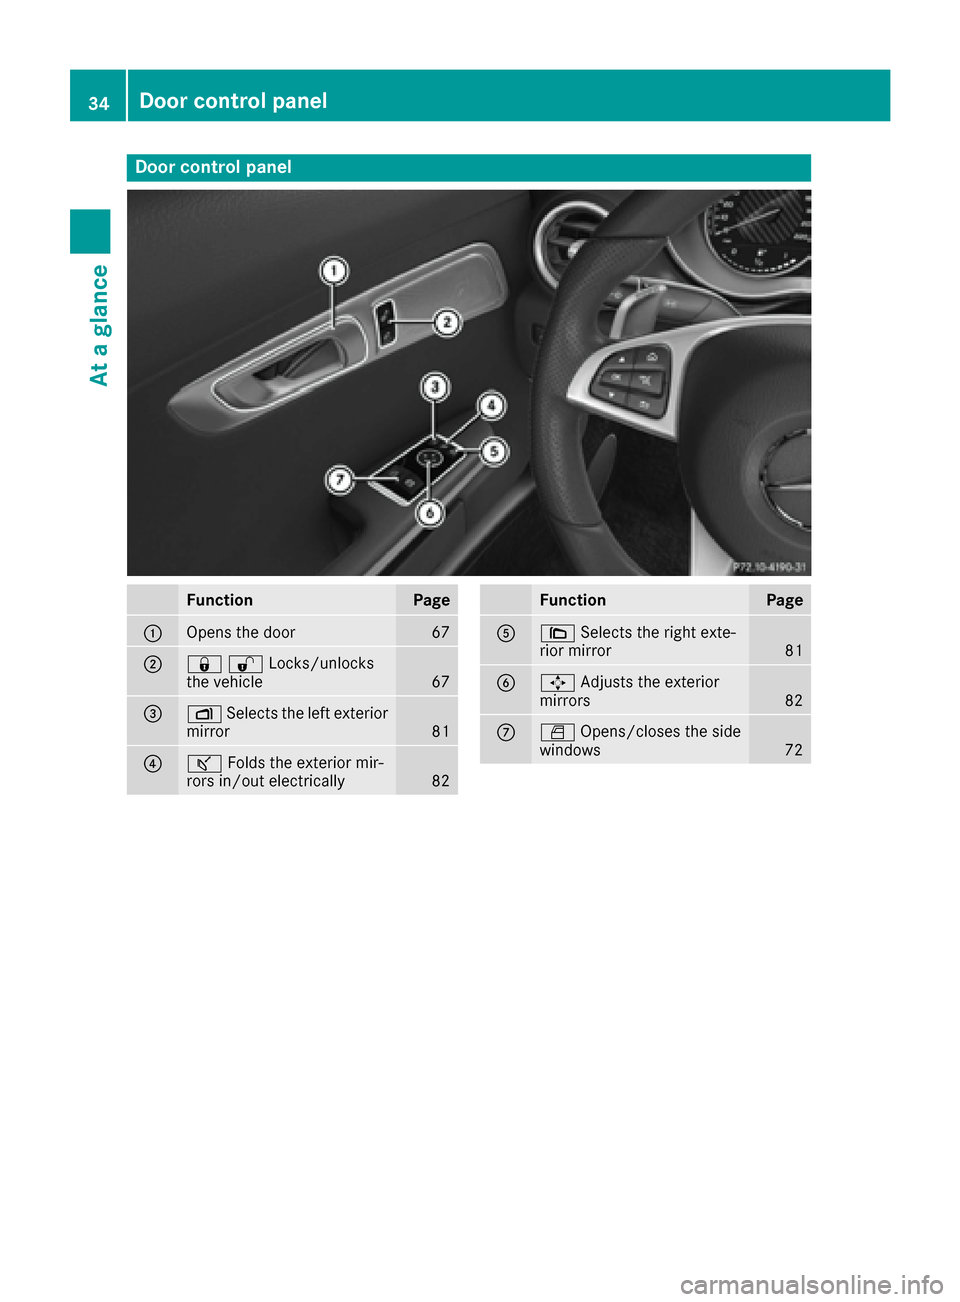 MERCEDES-BENZ AMG GT S 2017 C190 Owners Guide Door controlpanel
FunctionPage
:Opens th edoo r67
;&%Locks/unlocks
the vehicle67
=Z Selects the left exterior
mirror81
?ª Folds the exterior mir-
rors in/out electrically82
FunctionPage
A\ Selects th